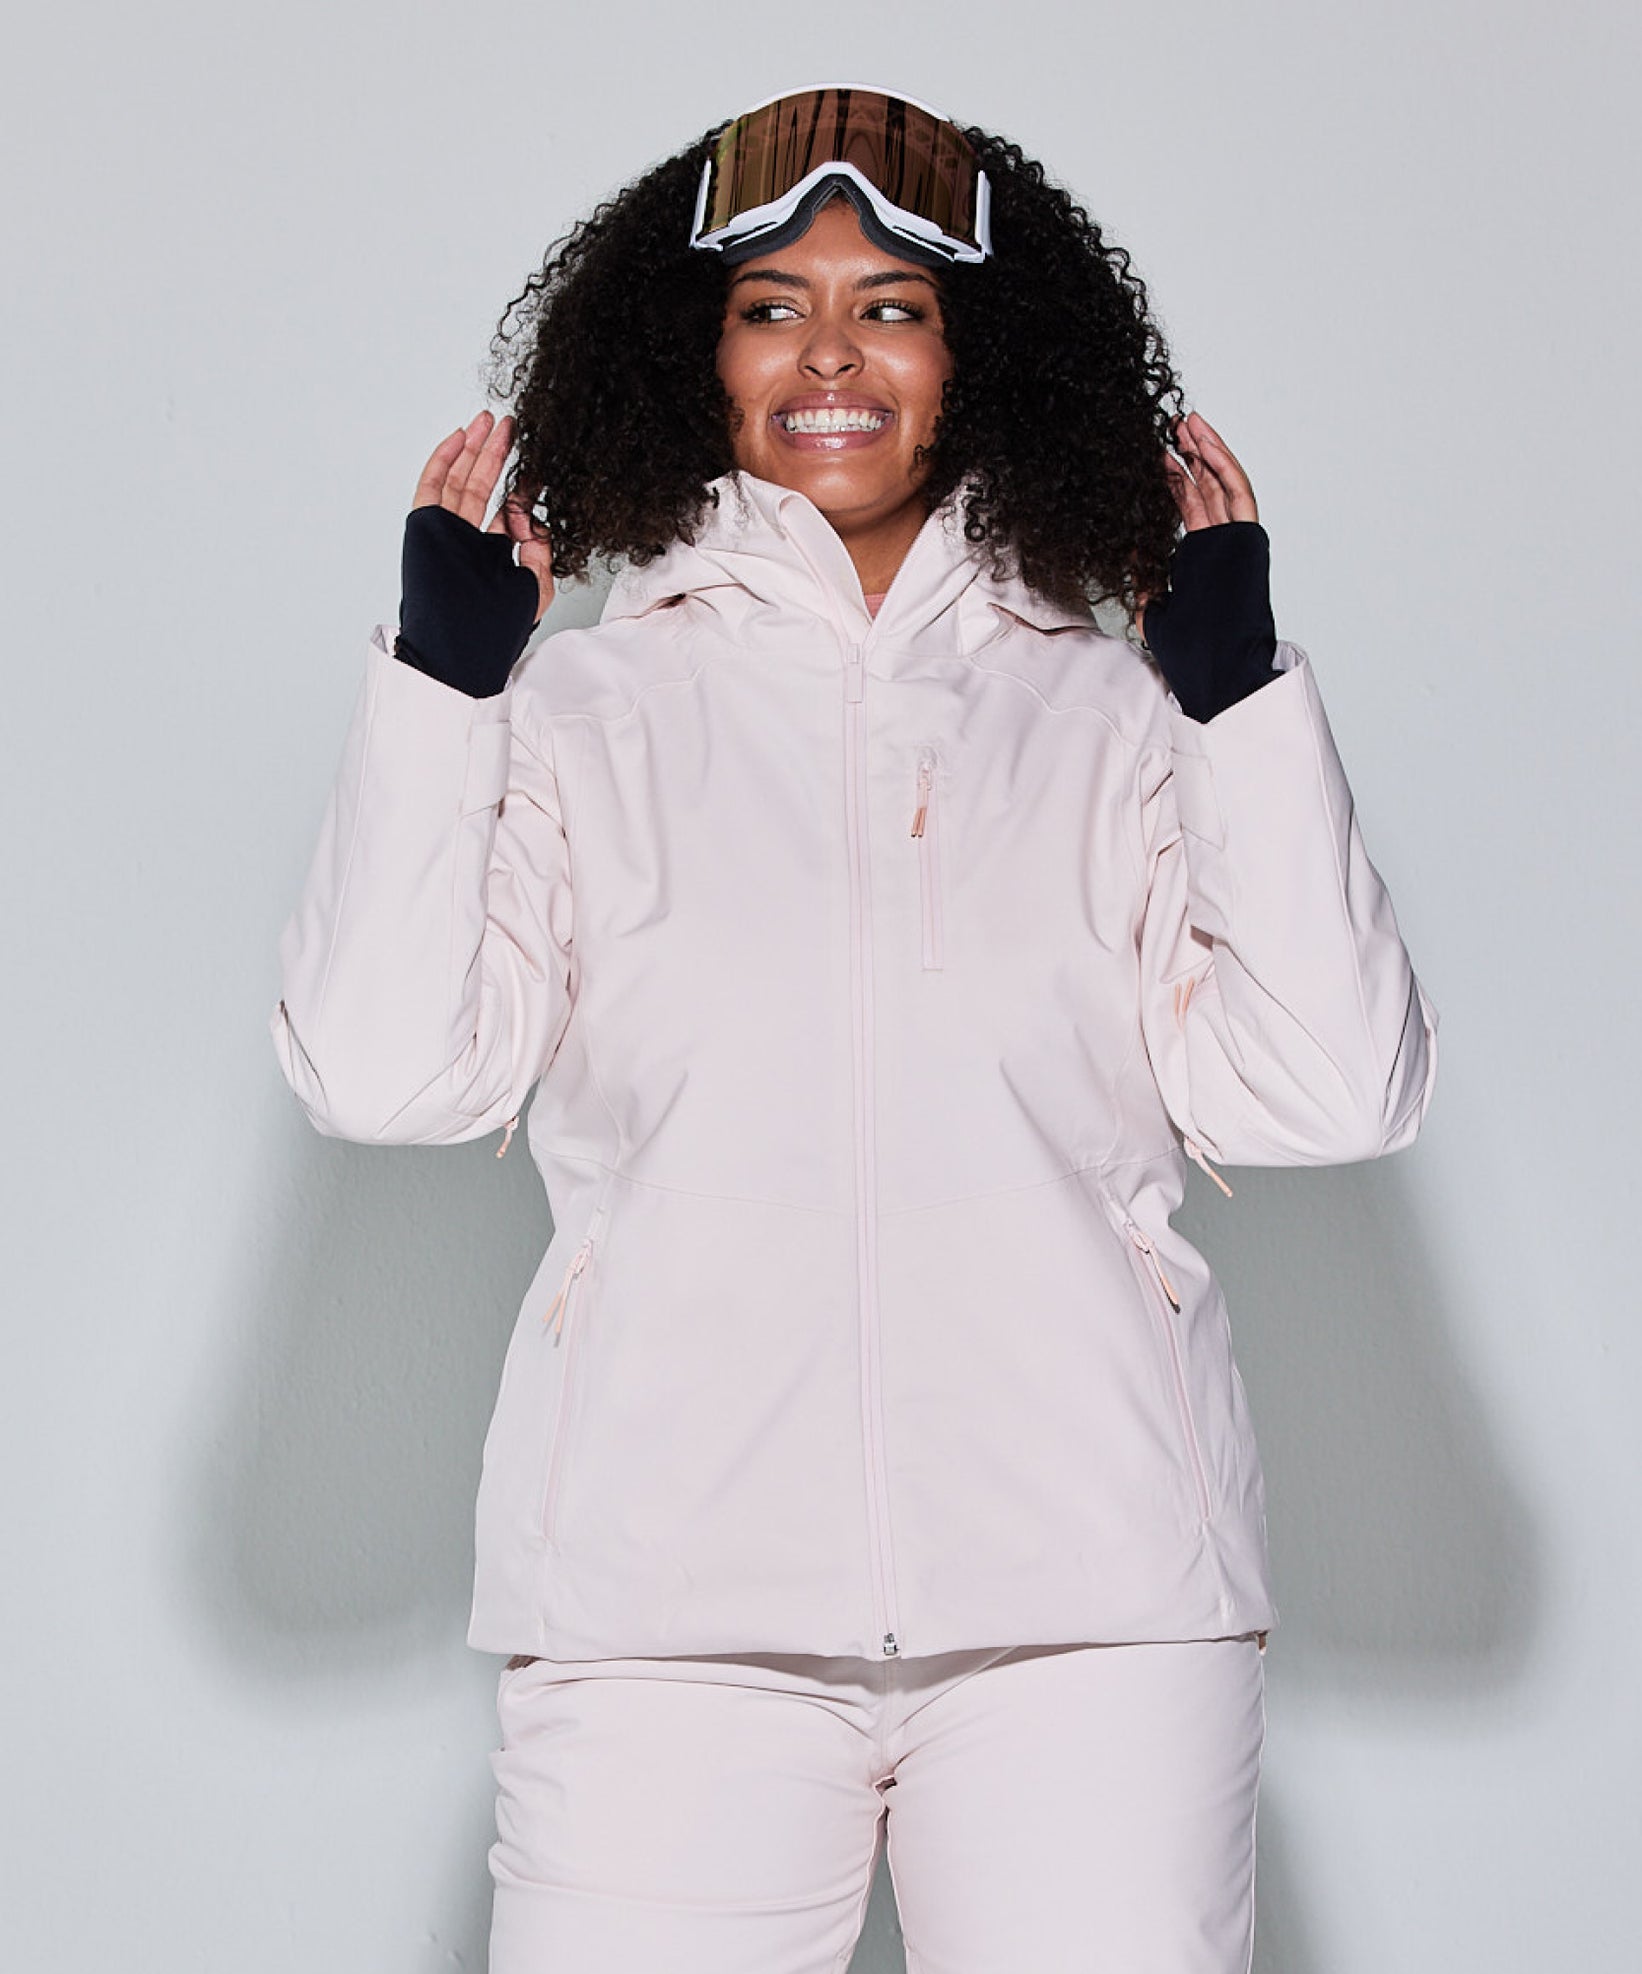 Meet Halfdays, the woman-owned brand behind the ultra-chic ski jackets all  over Instagram - Yahoo Sports